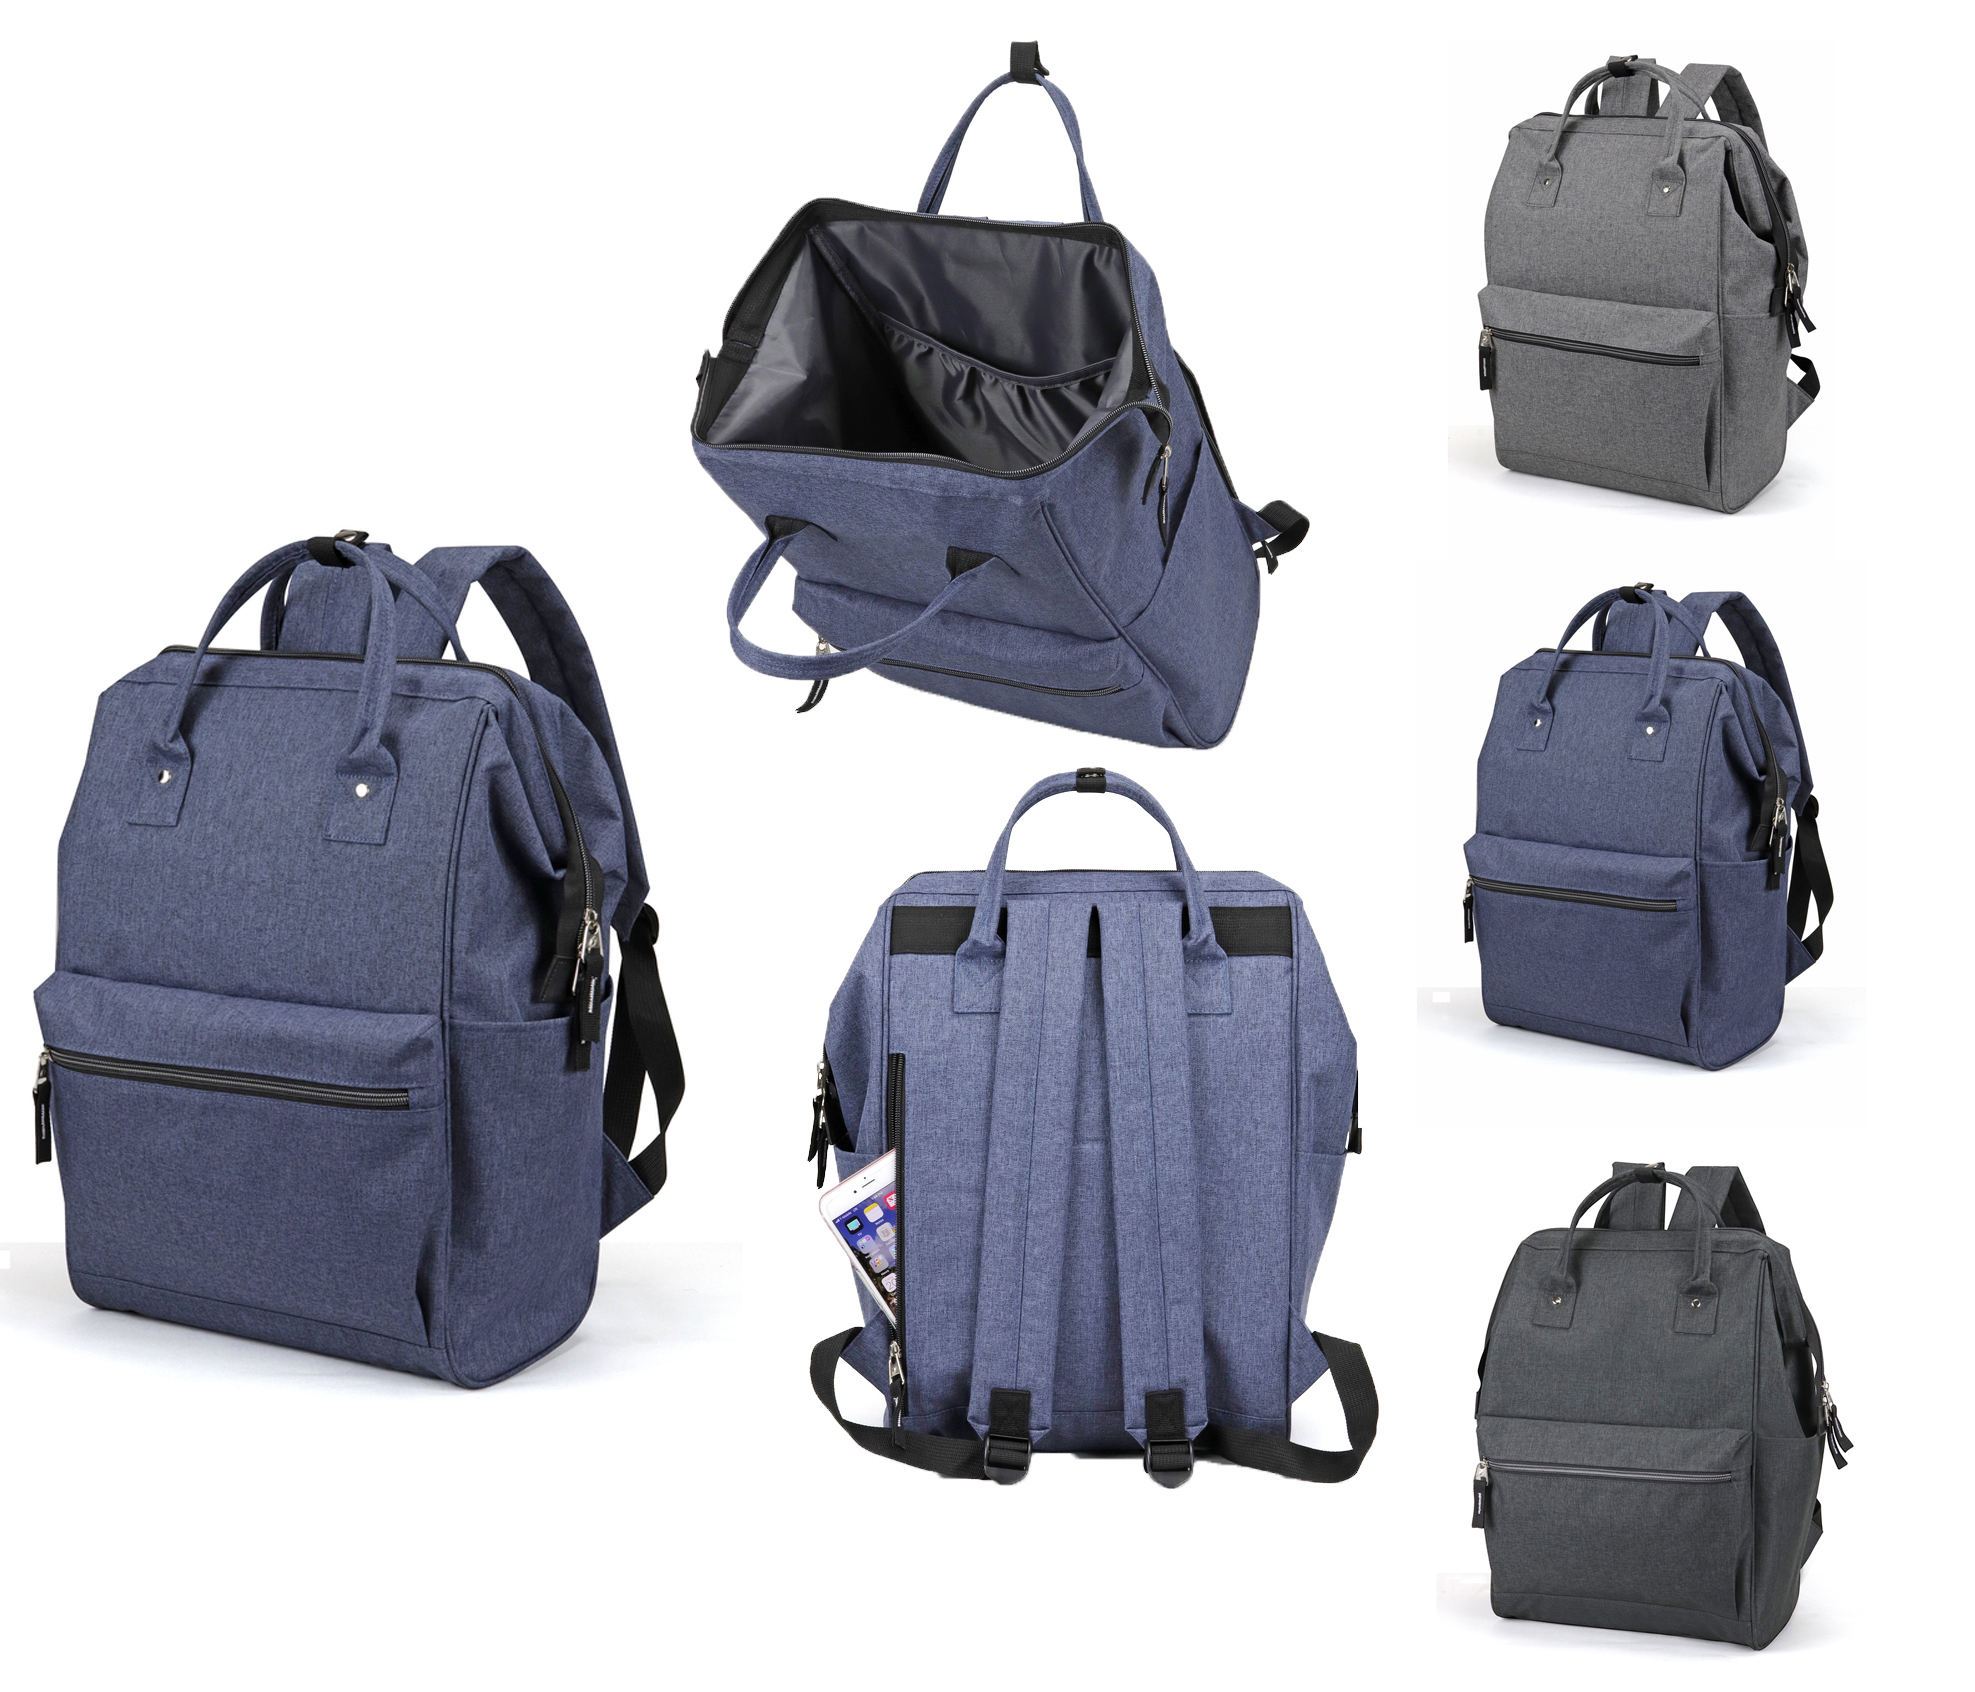 ''22'''' Wide-Mouth Computer BACKPACKs w/ Tablet Storage & Mesh Pockets - Choose Your Color(s)''